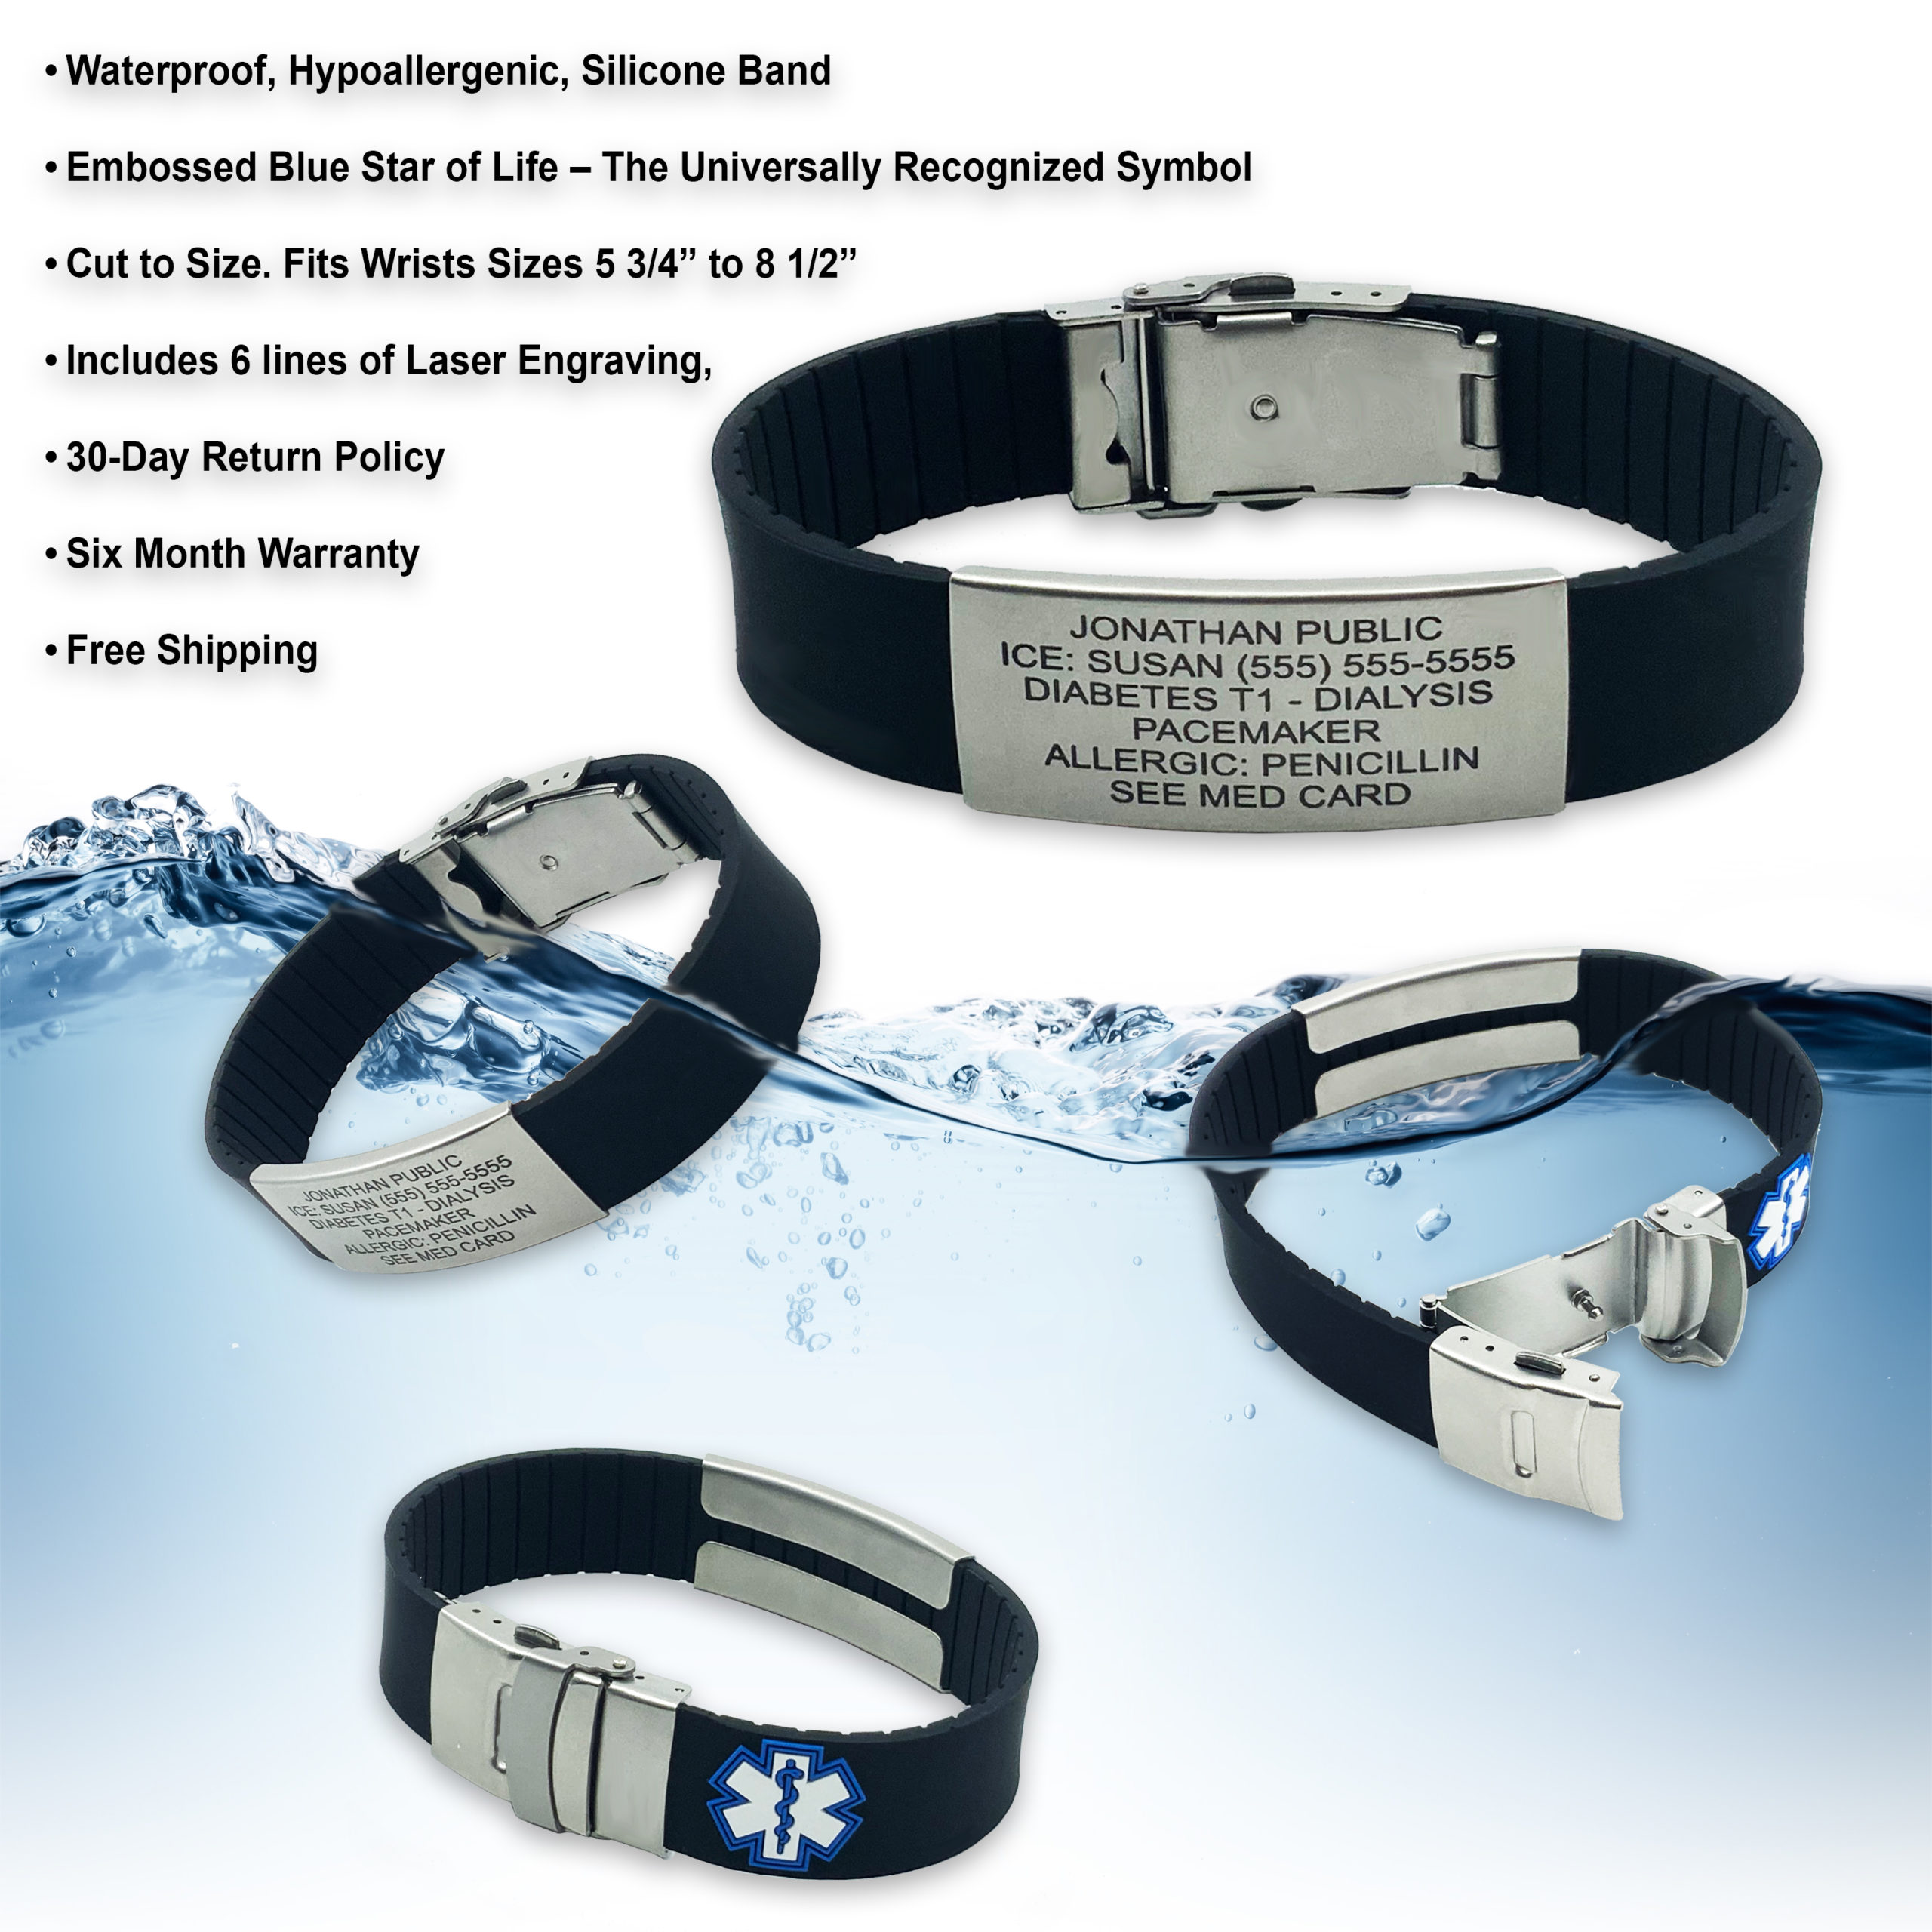 Waterproof in Case of Emergency Performance Teal Skinny Sport Fitness Safety ID Bracelet Hypo-allergenic Silicone with Free Engraving 